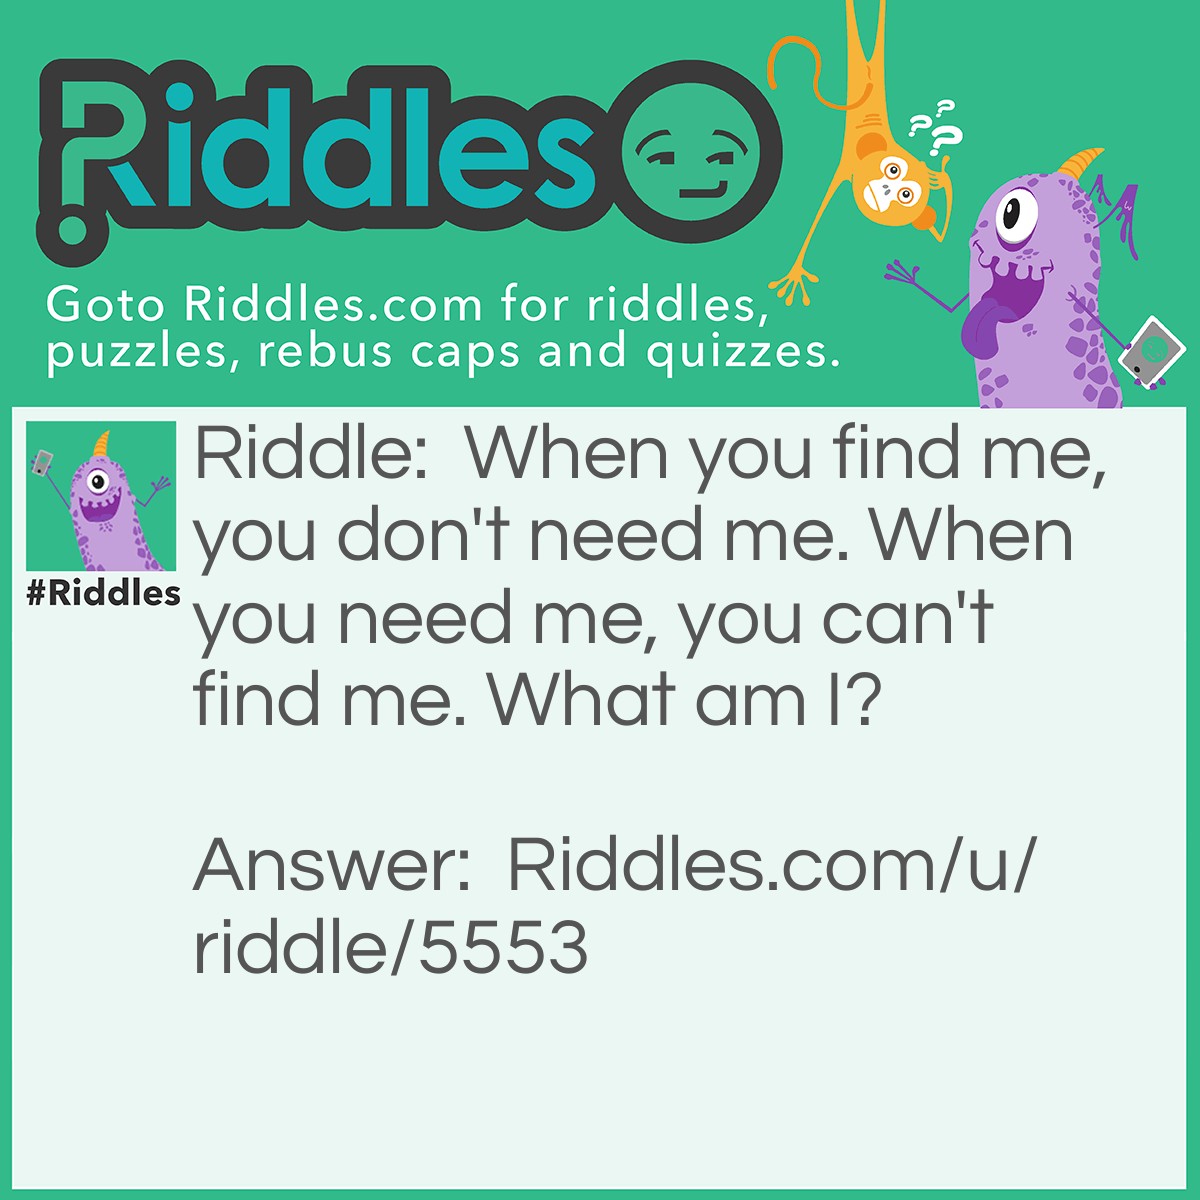 Riddle: When you find me, you don't need me. When you need me, you can't find me. What am I? Answer: A Lego Piece.